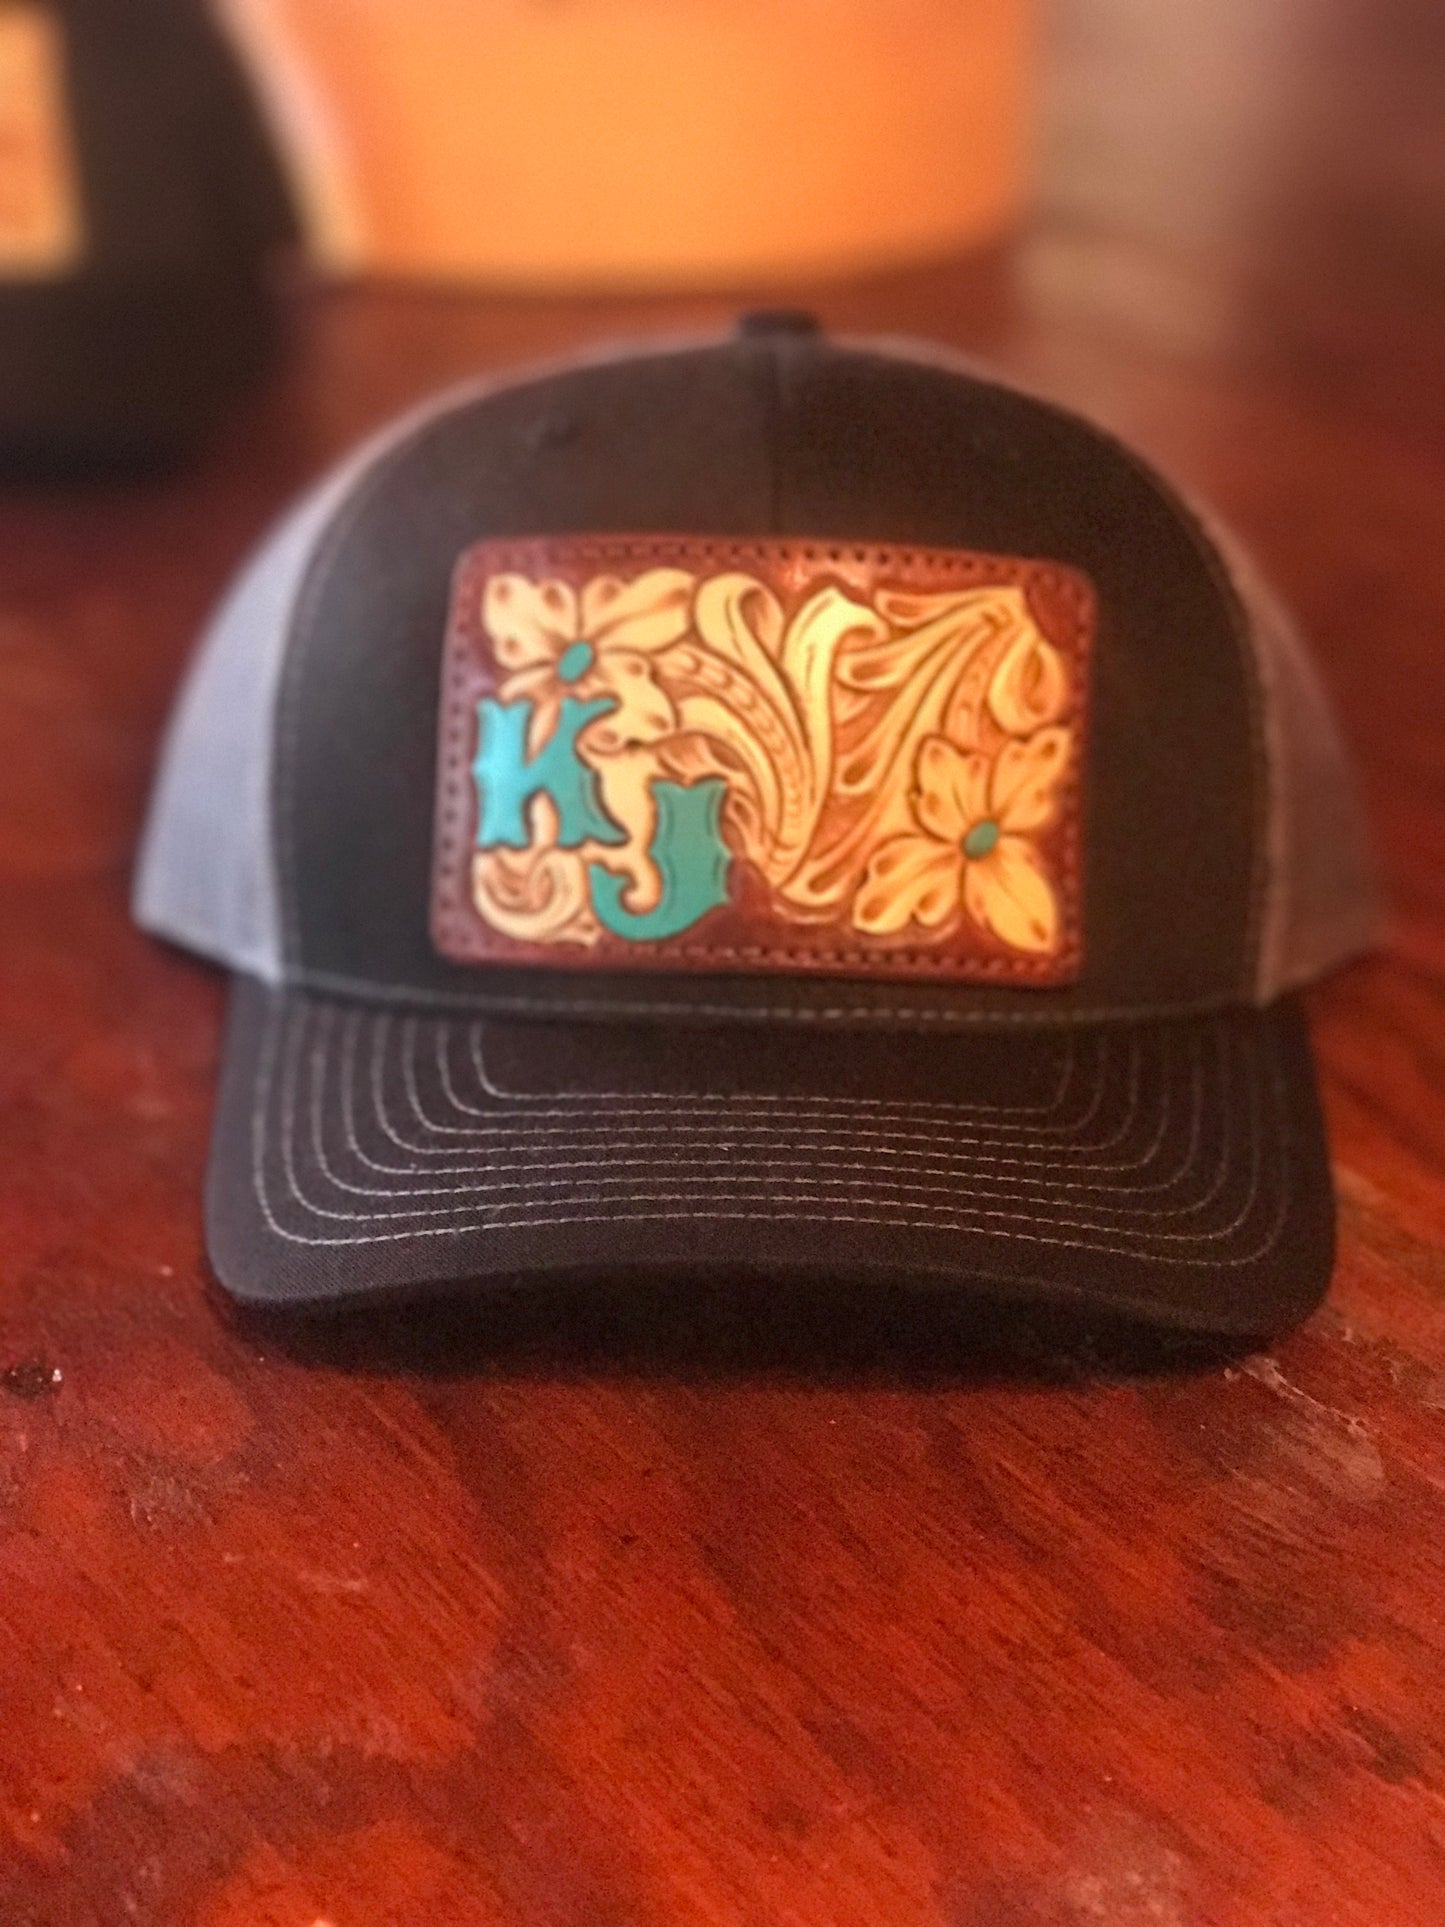 CUSTOM tooled hat patch. MADE RO ORDER